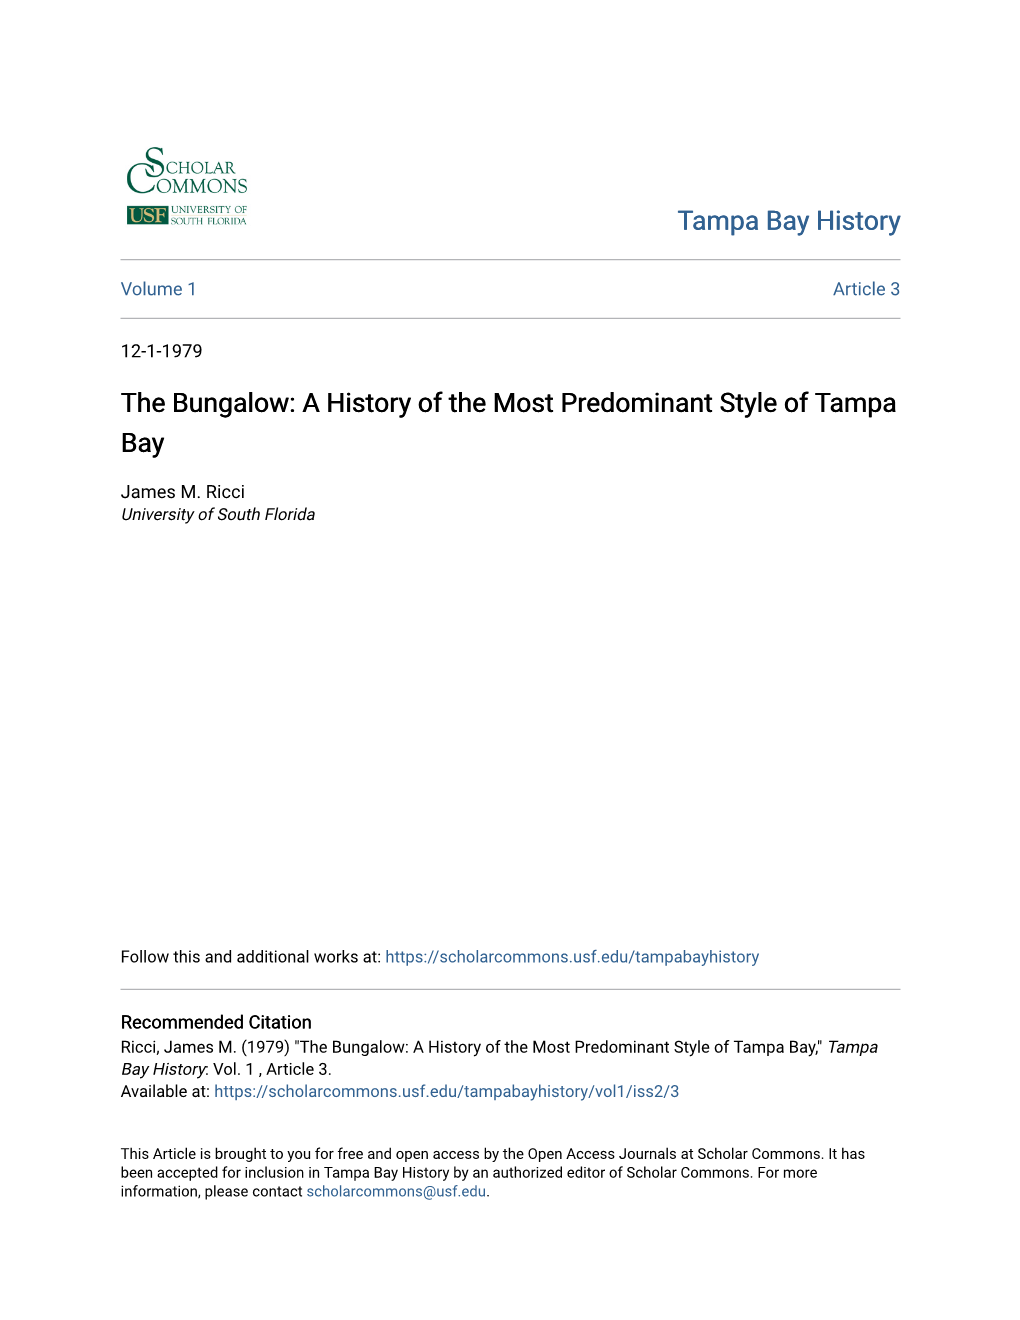 The Bungalow: a History of the Most Predominant Style of Tampa Bay